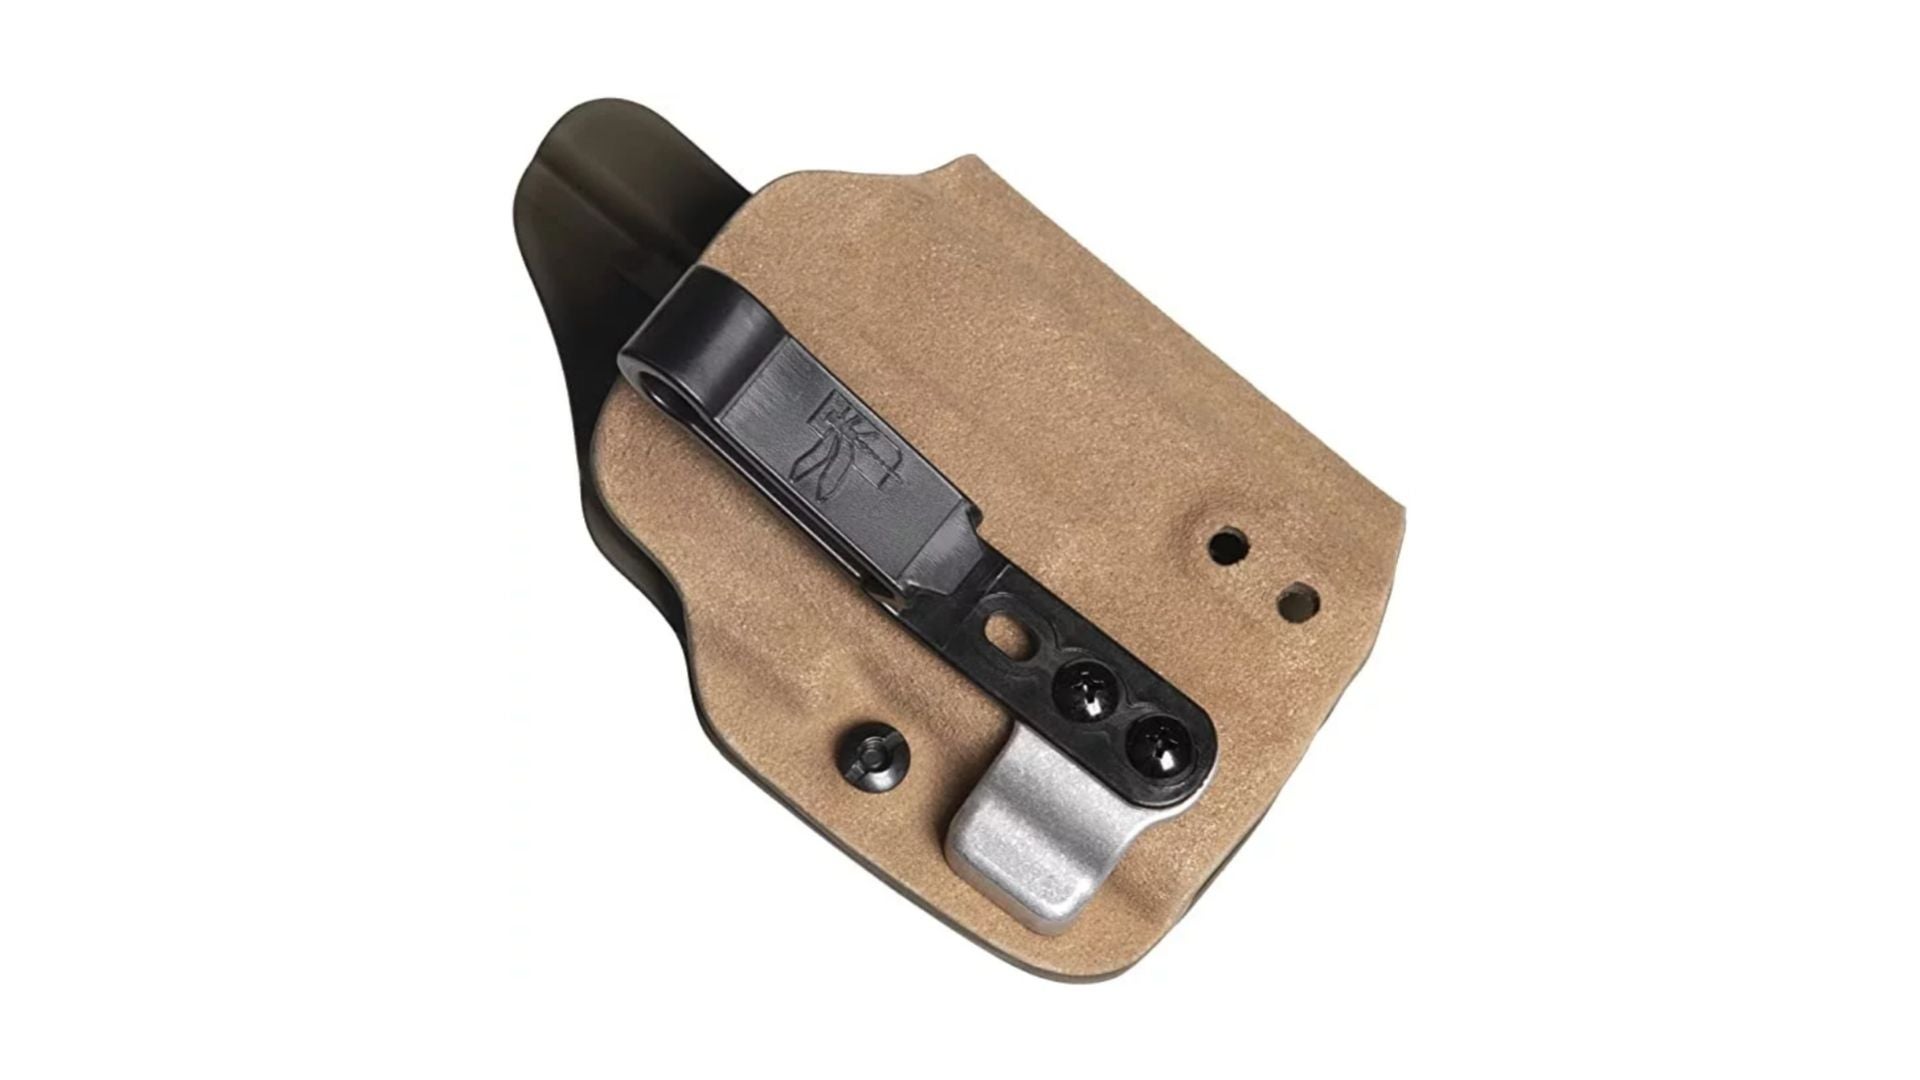 III. Understanding the Different Types of Quick-Release Holsters